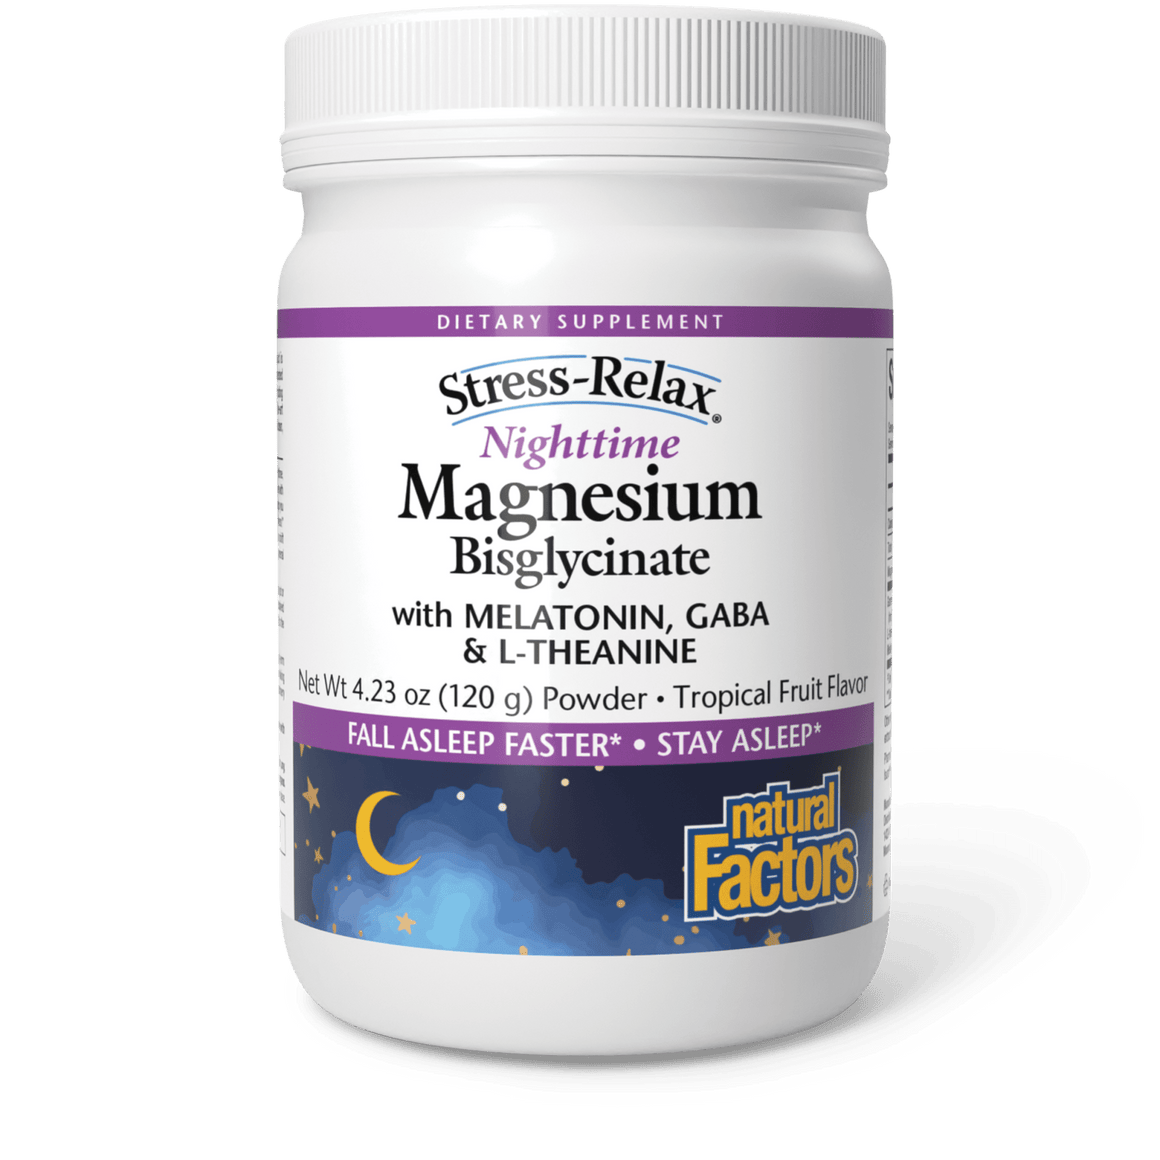 Stress-Relax Nighttime Magnesium Bisglycinate - Natural Factors